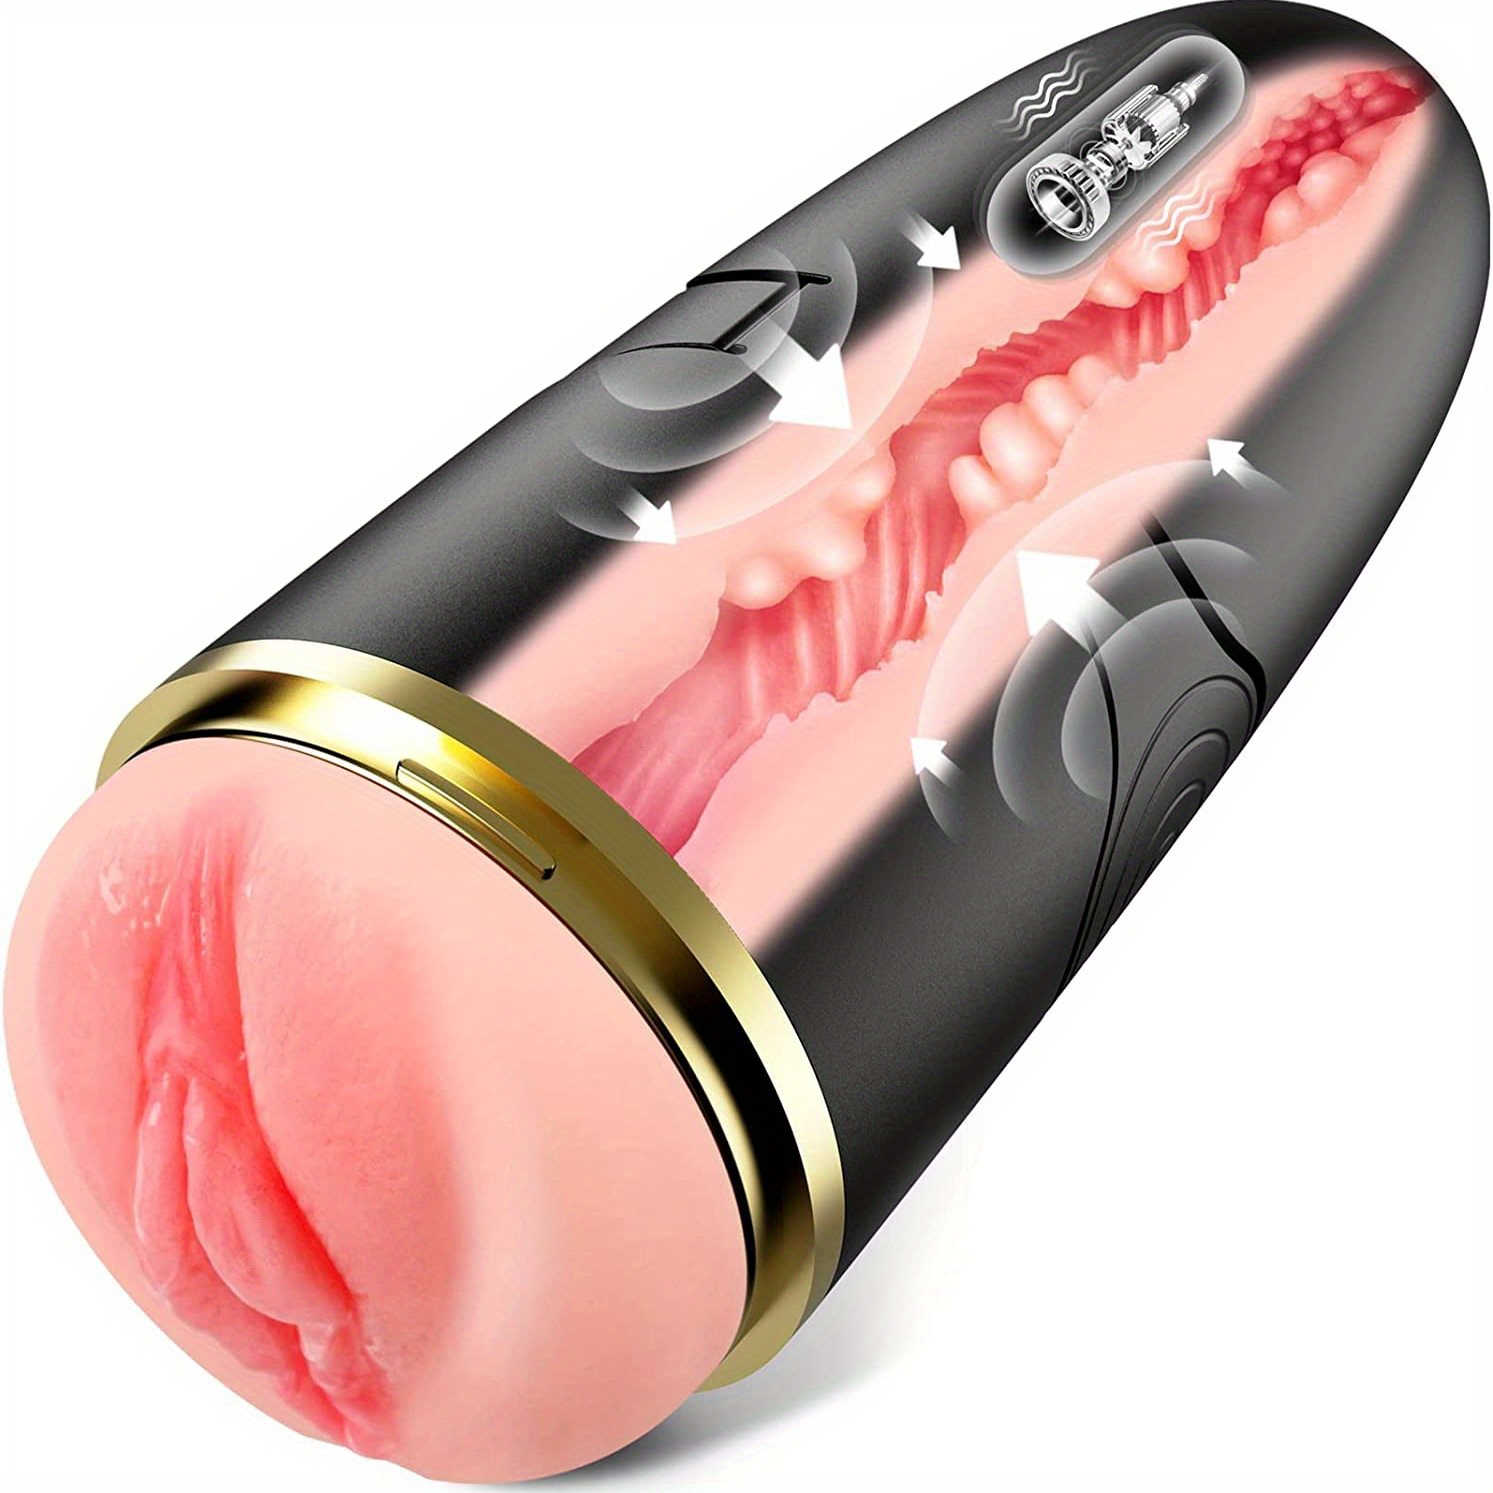 Automatic Male Masturbator With 10 Vibrations For Penis Stimulation, Electric Pocket Pussy For Male Stroker, Realistic Textured 3d Vagina, Man Masturbation Sex Toy For Men Male Adult Sex Toys picture